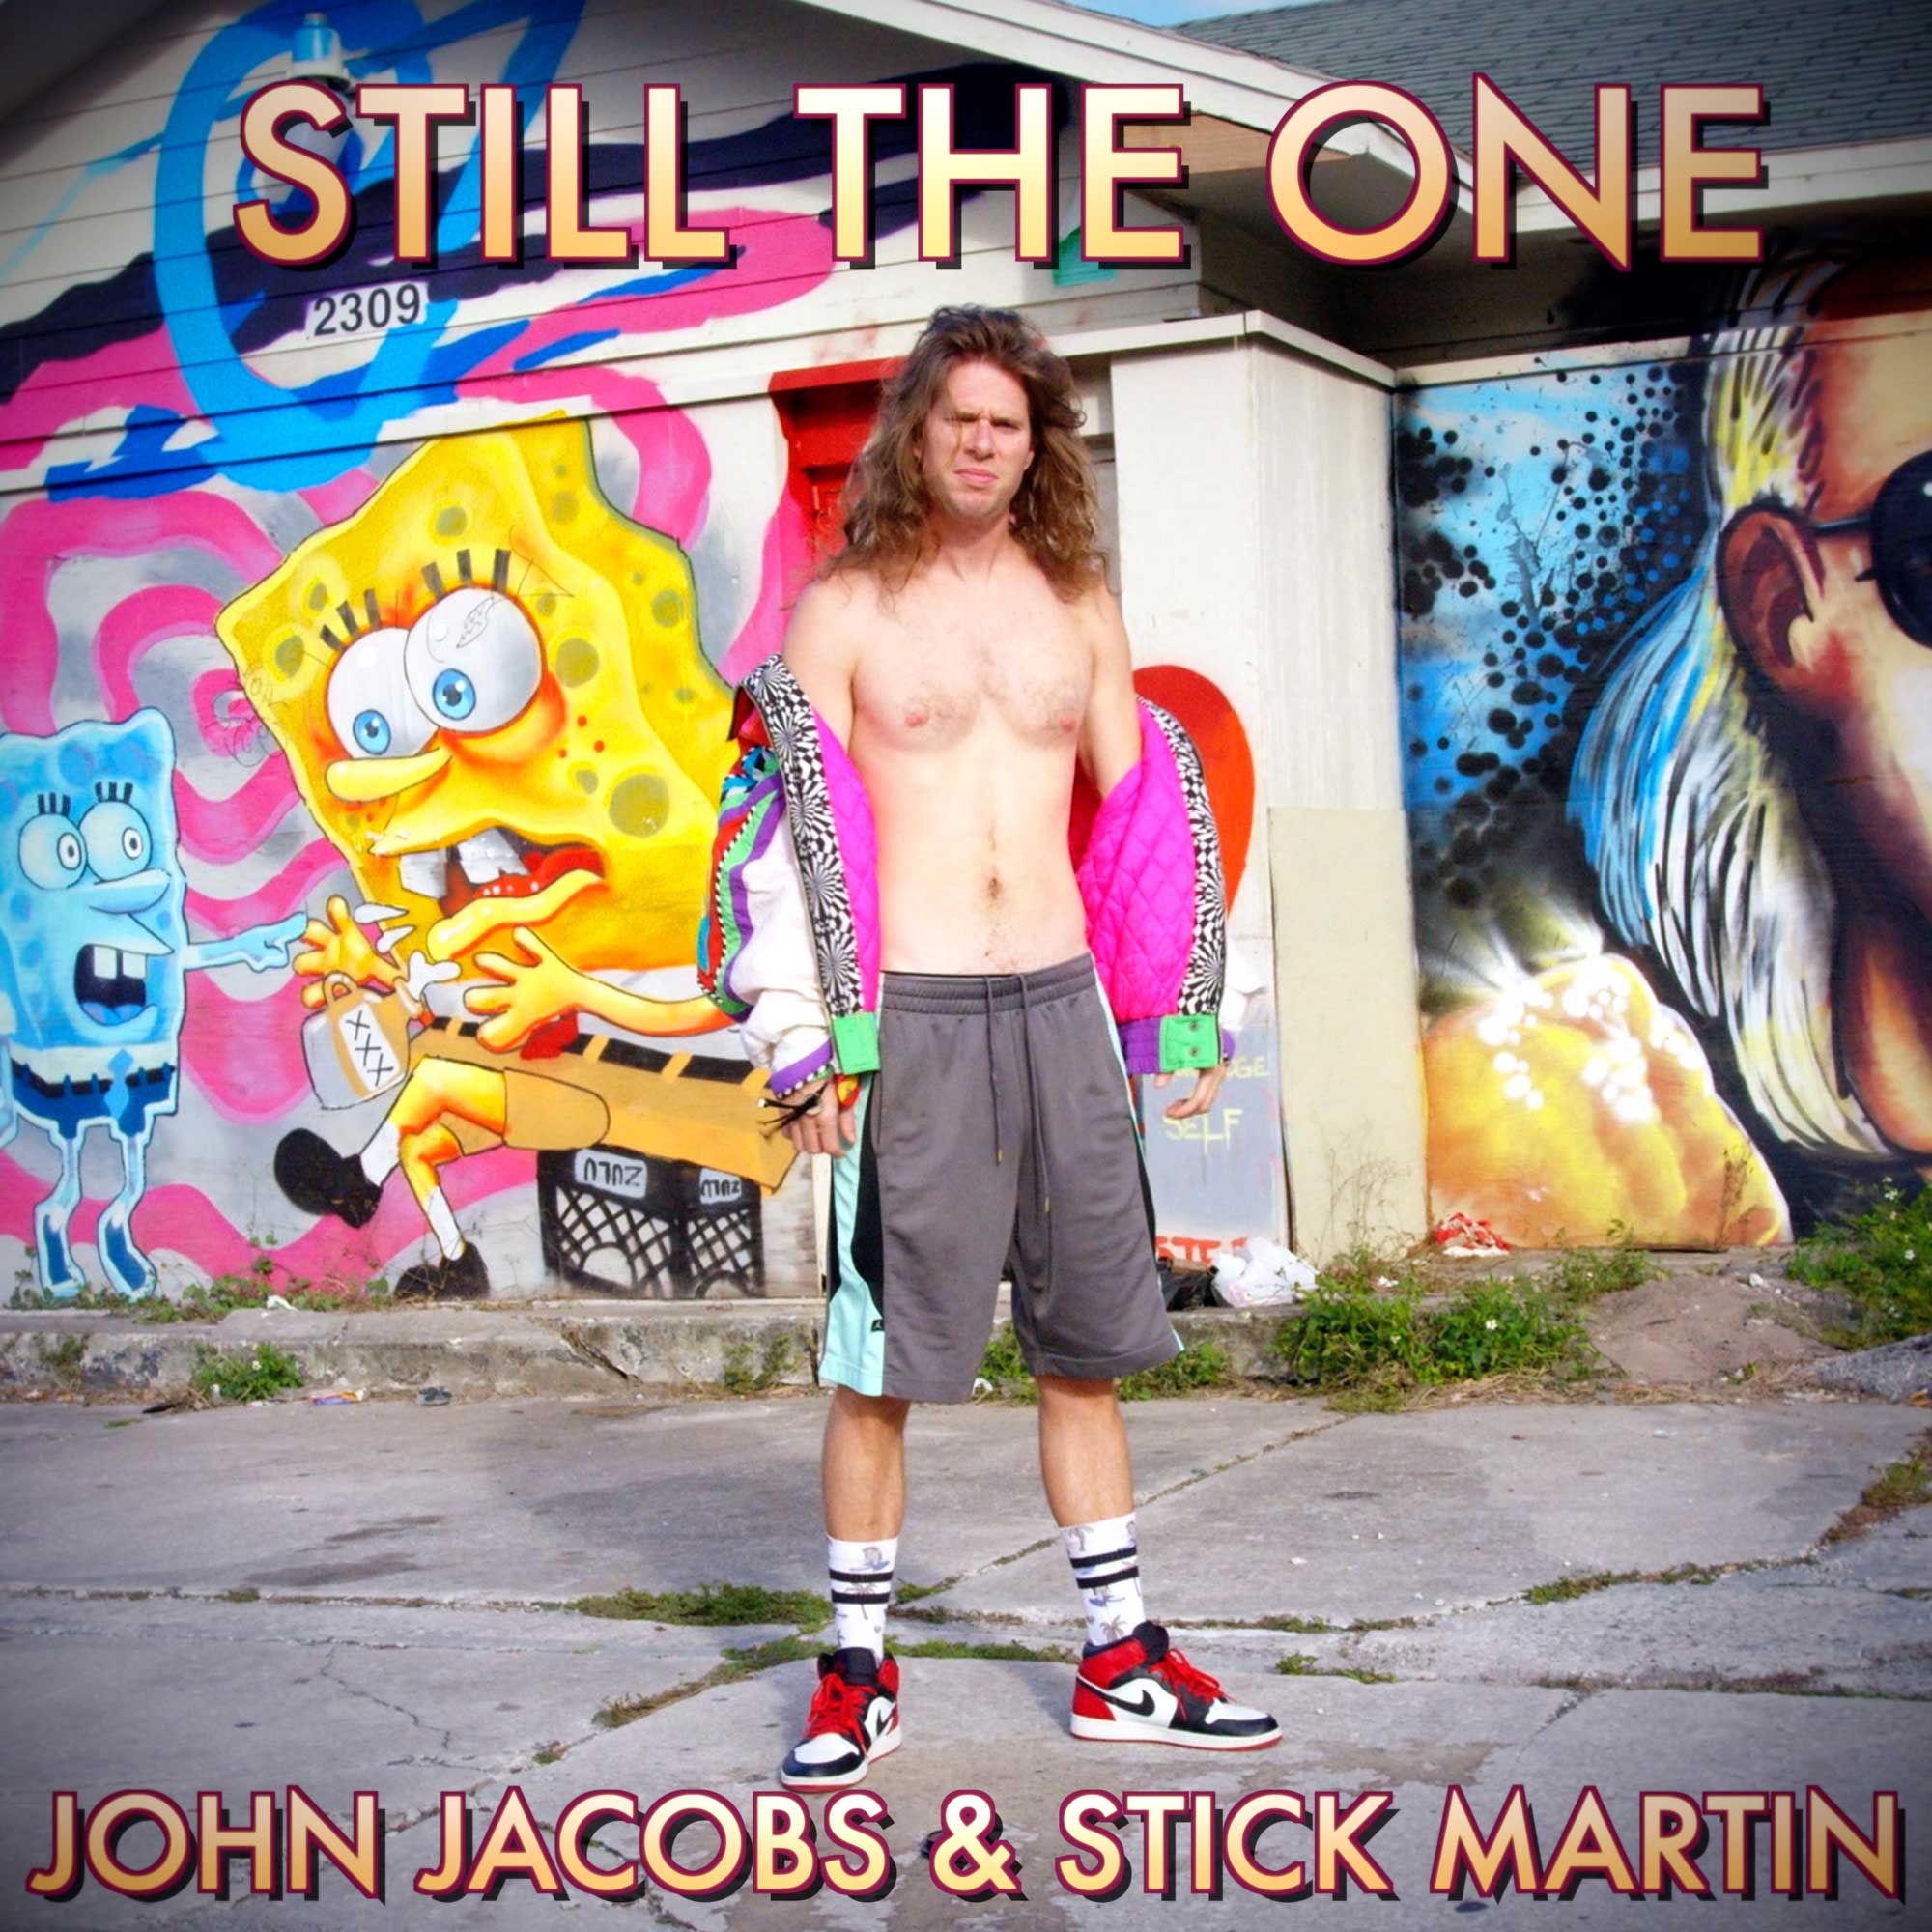 John Jacobs and Stick Martin - Still the One - Full Album Download